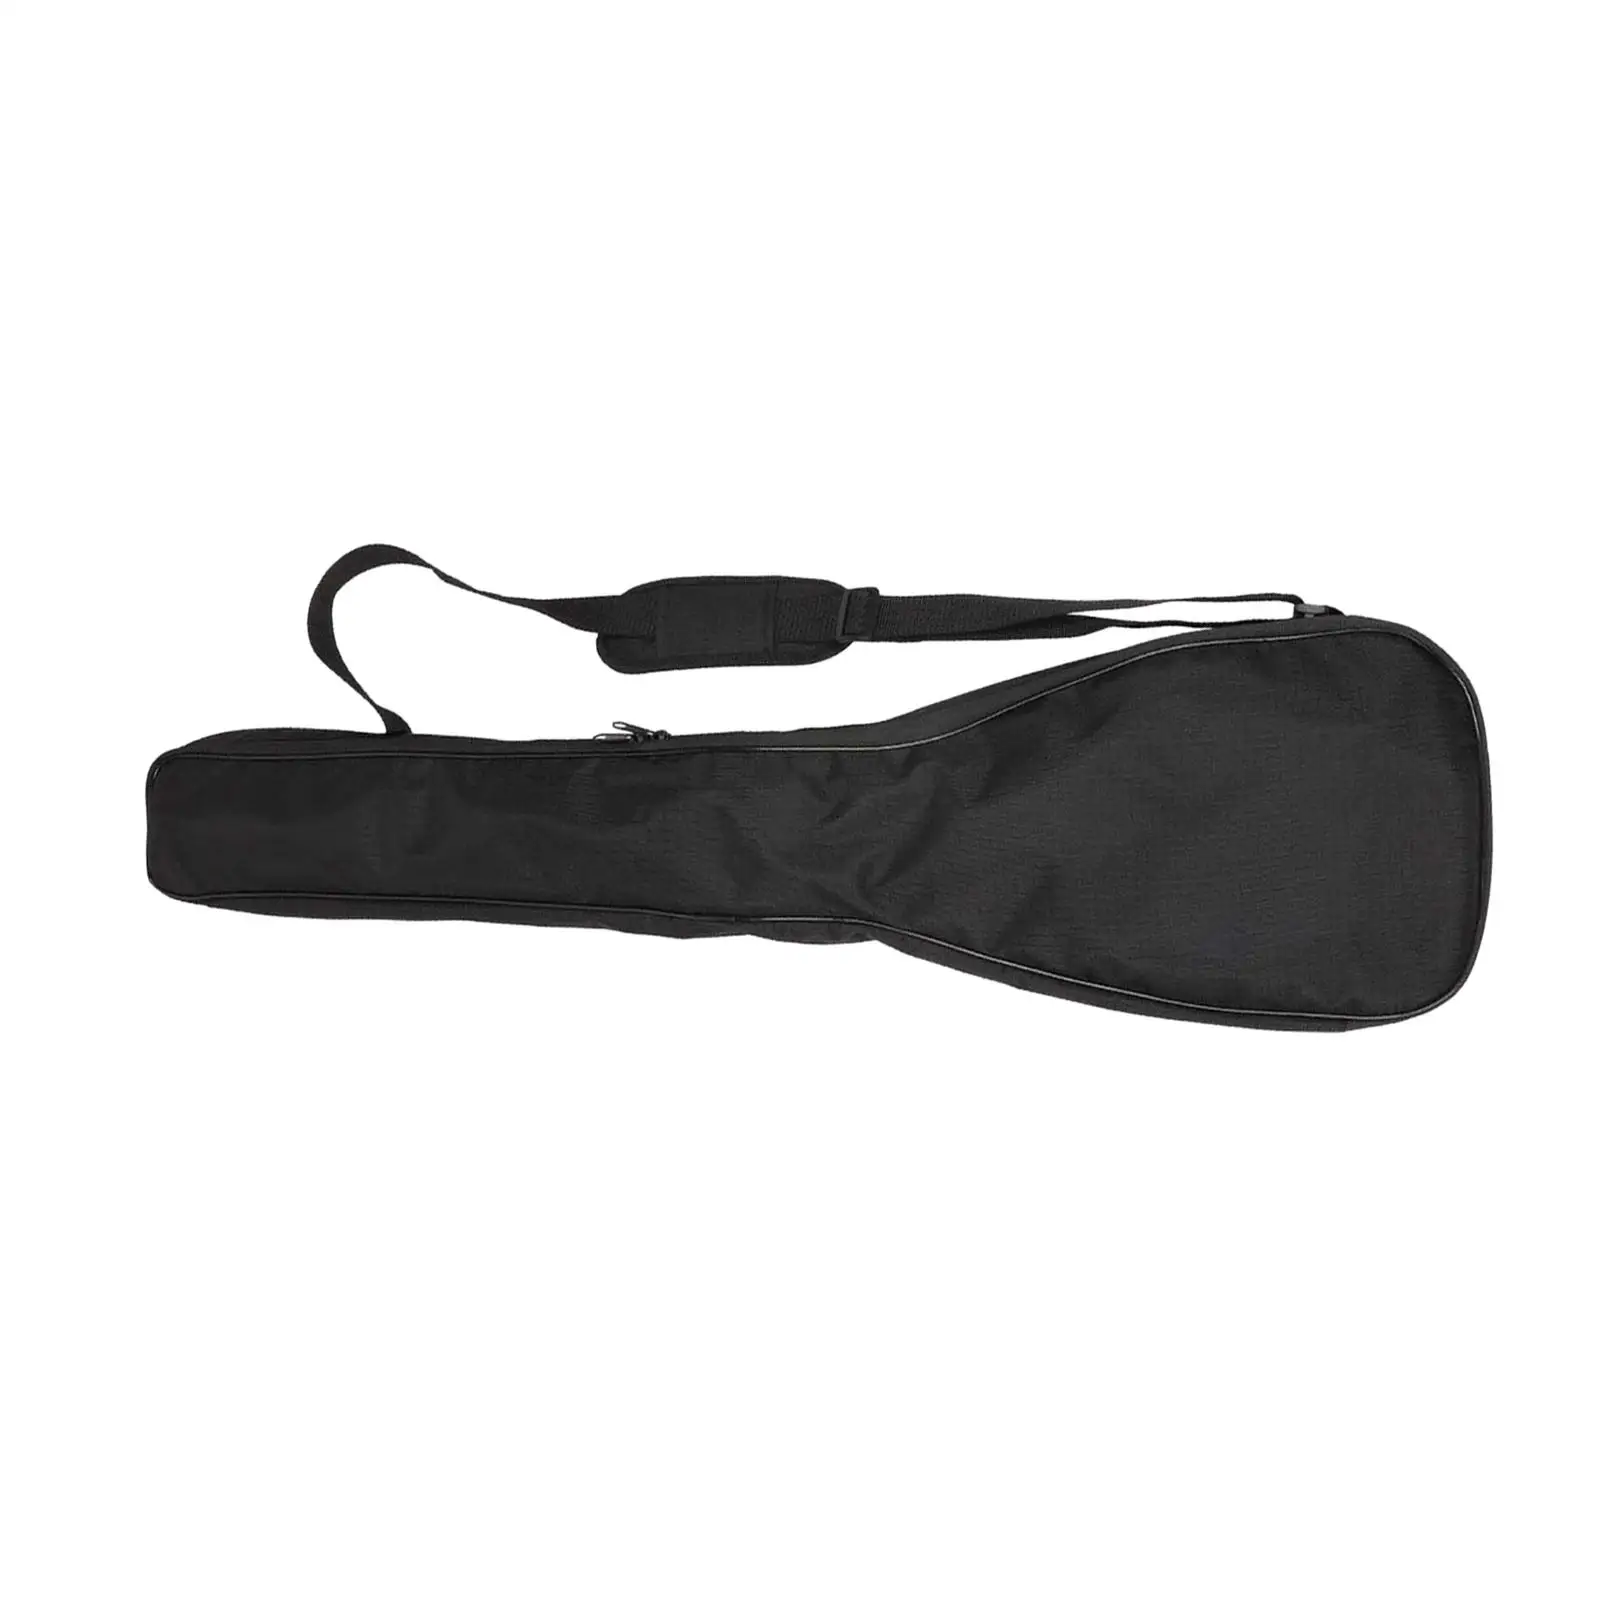 Canoe Kayak Paddle Bag for 3 Piece Split Paddle Functional Thick Durable Lightweight